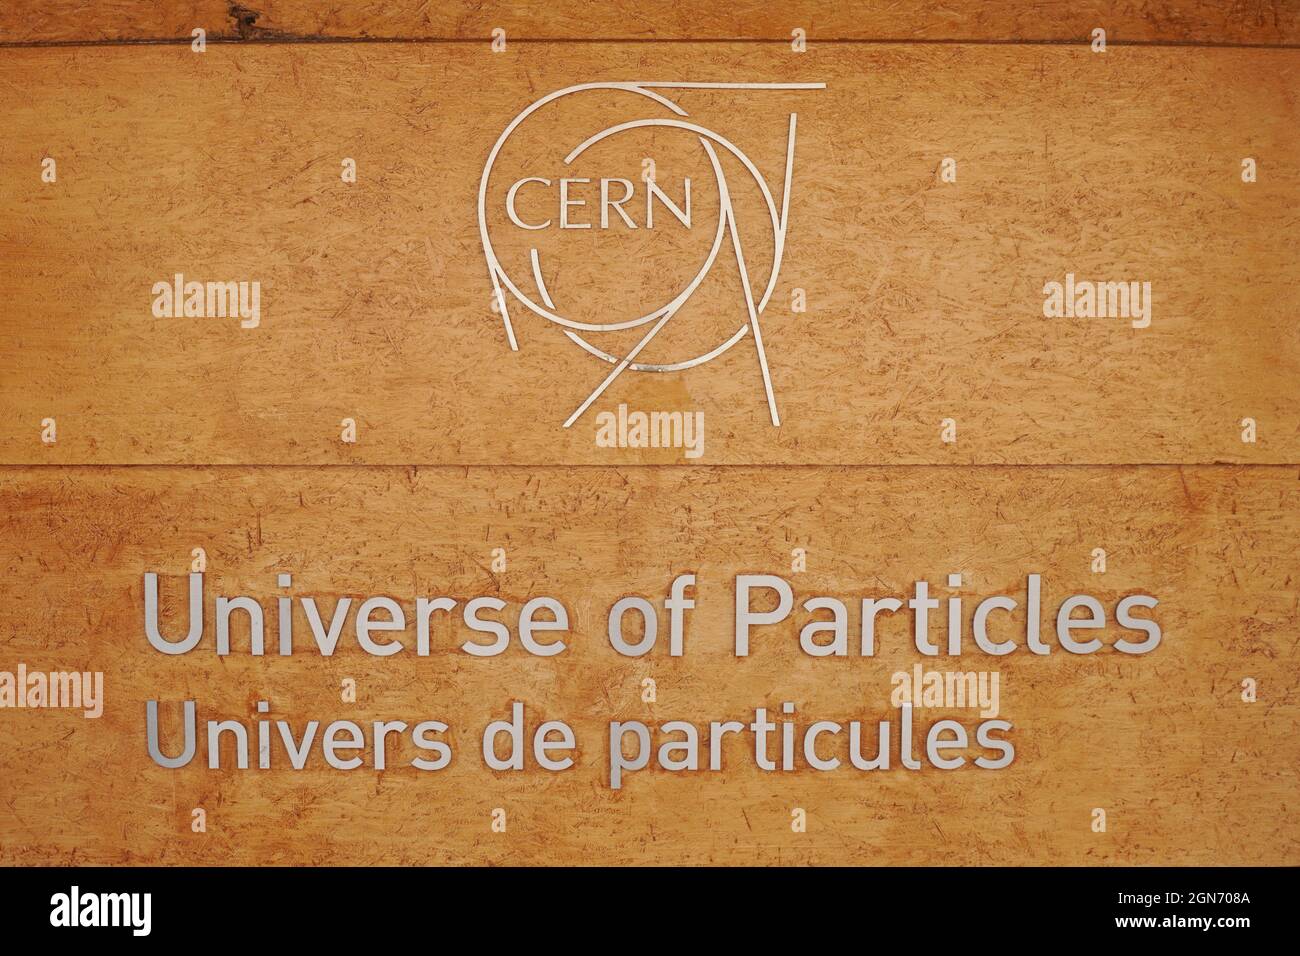 Universe of Particles. Permanent exhibition in the Globe of Science and Innovation at CERN, the European Organization for Nuclear Research. Stock Photo